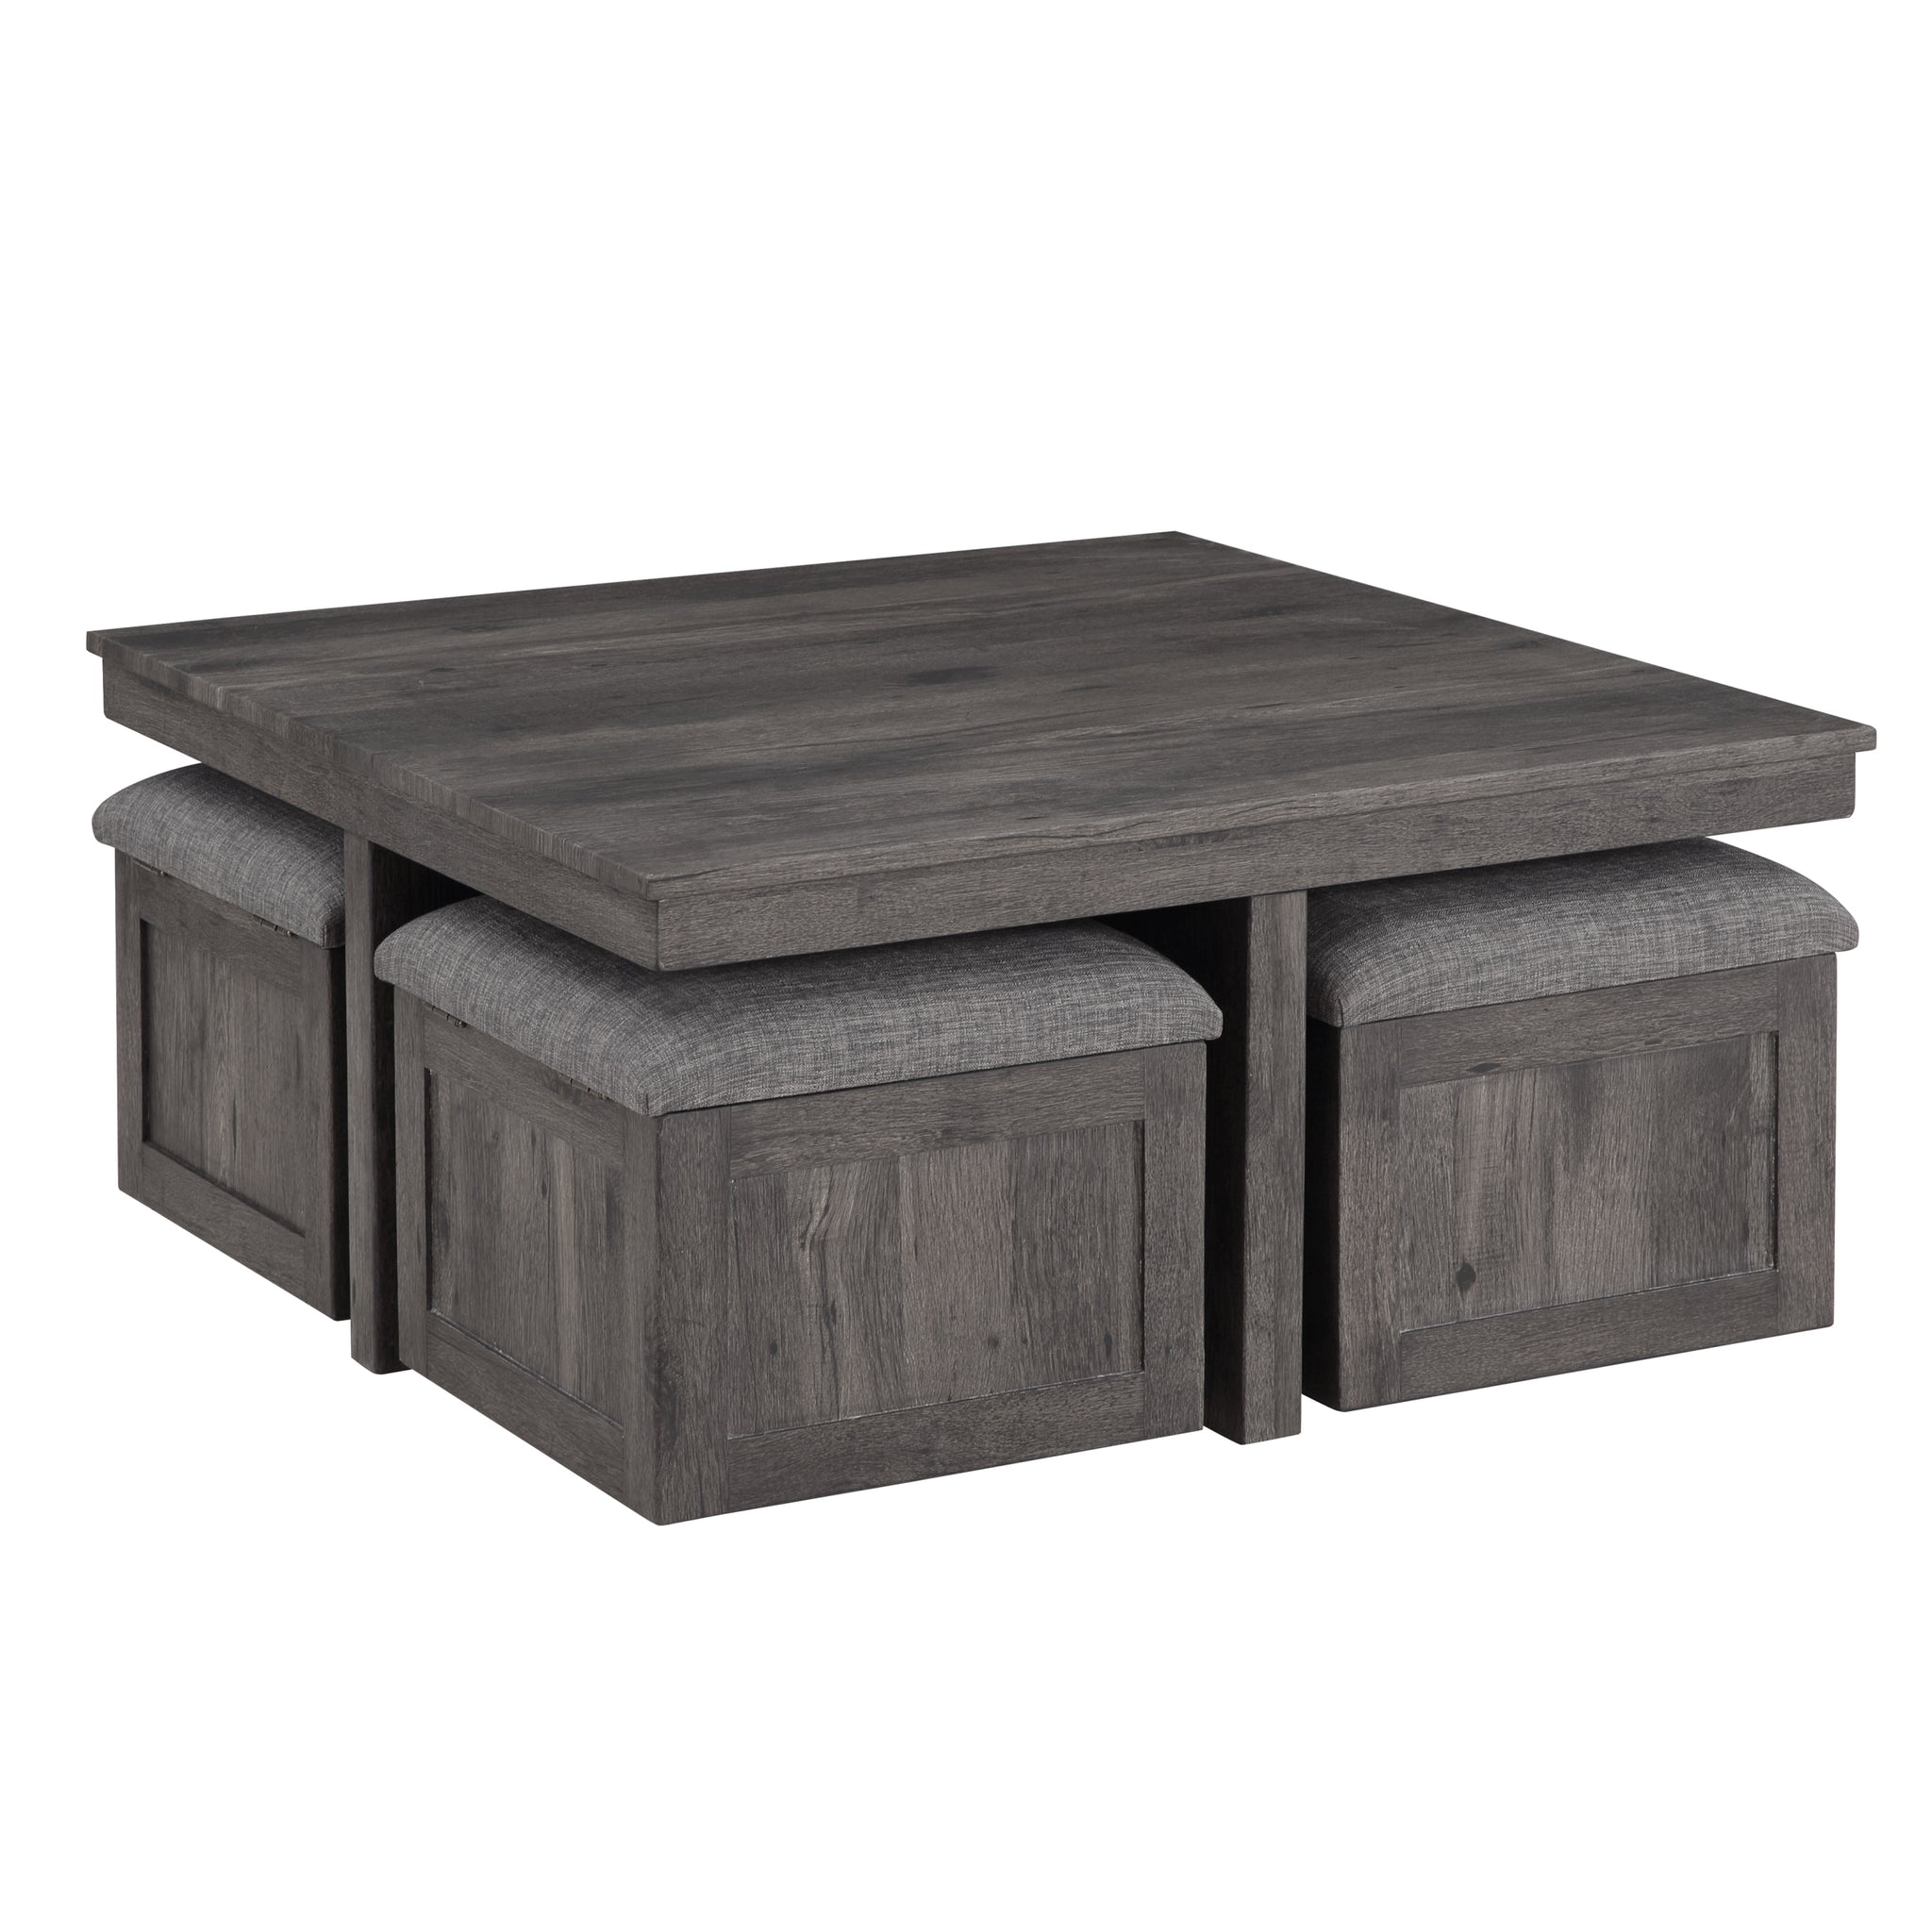 Moseberg 38" Rustic Wood Coffee Table with Storage